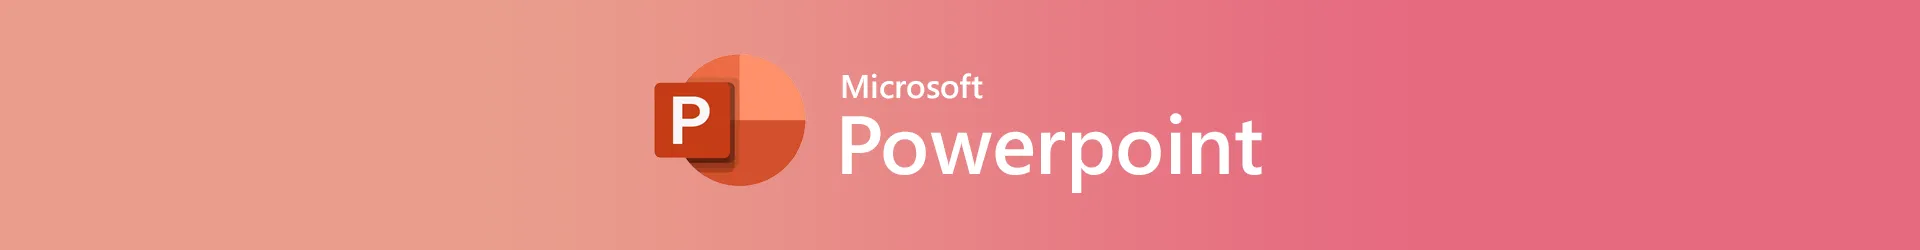 Formation Microsoft Office PowerPoint 2019